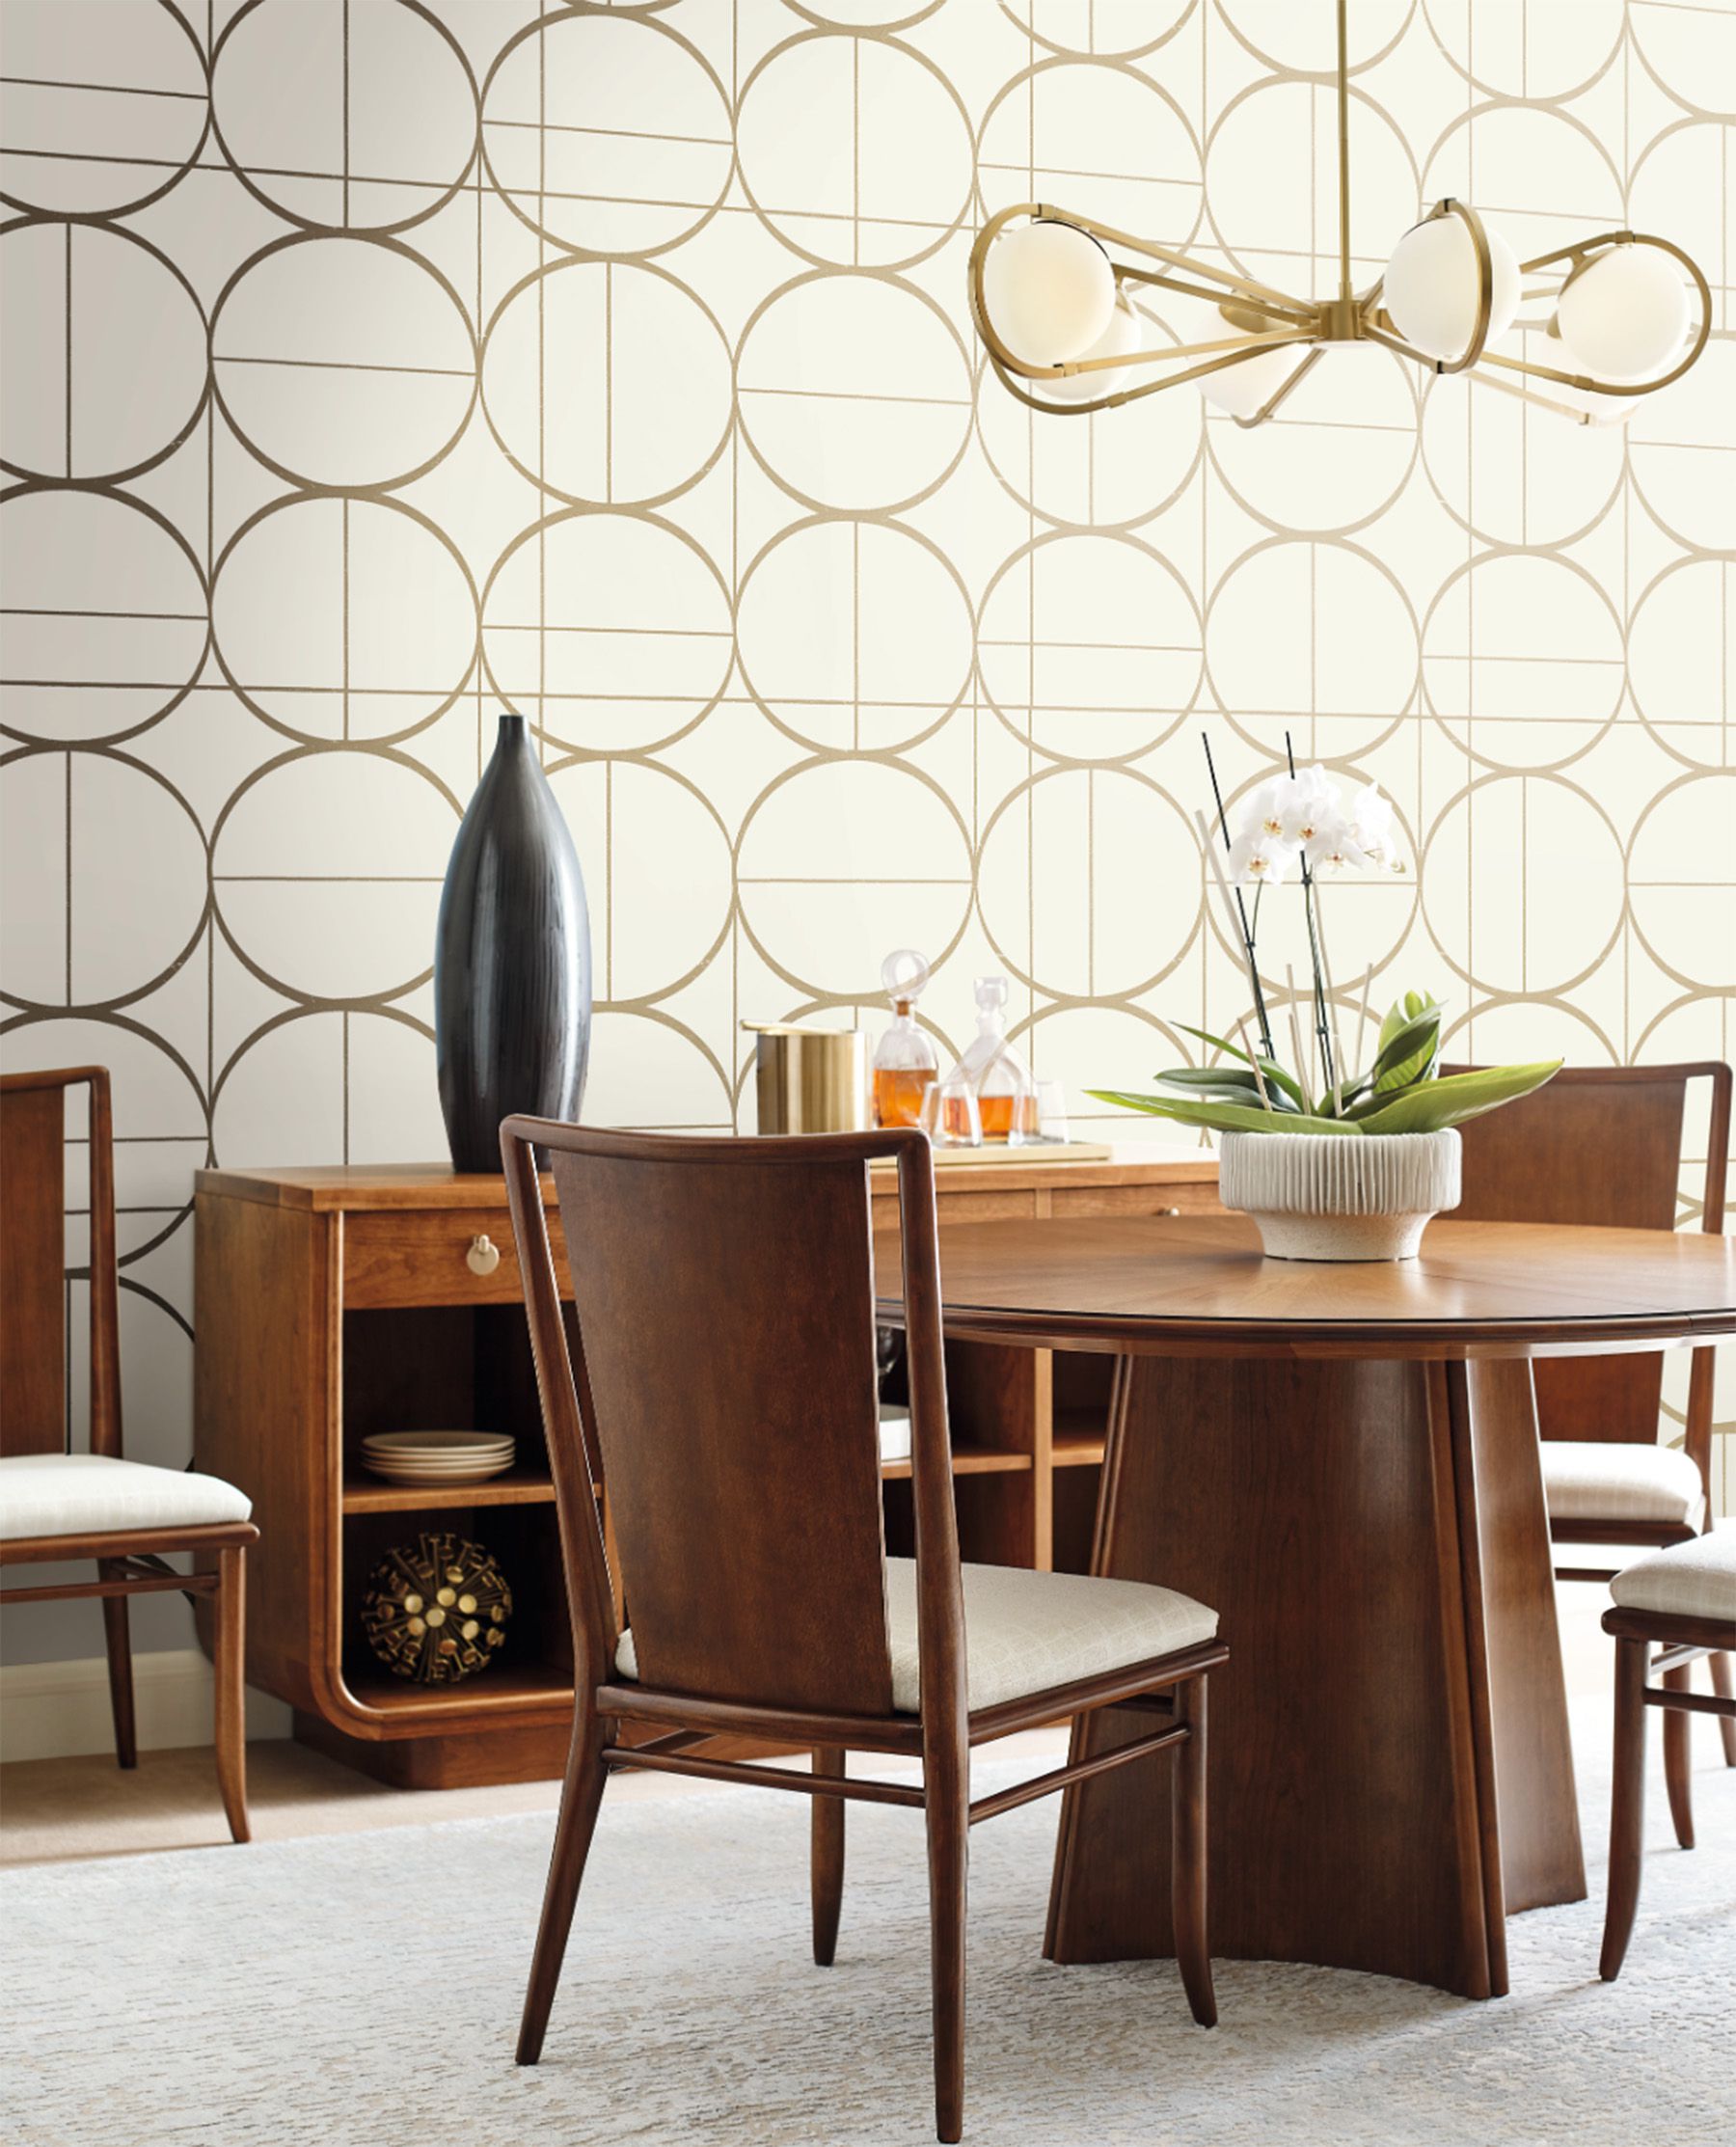 seventies style geometric wallpaper in dining room